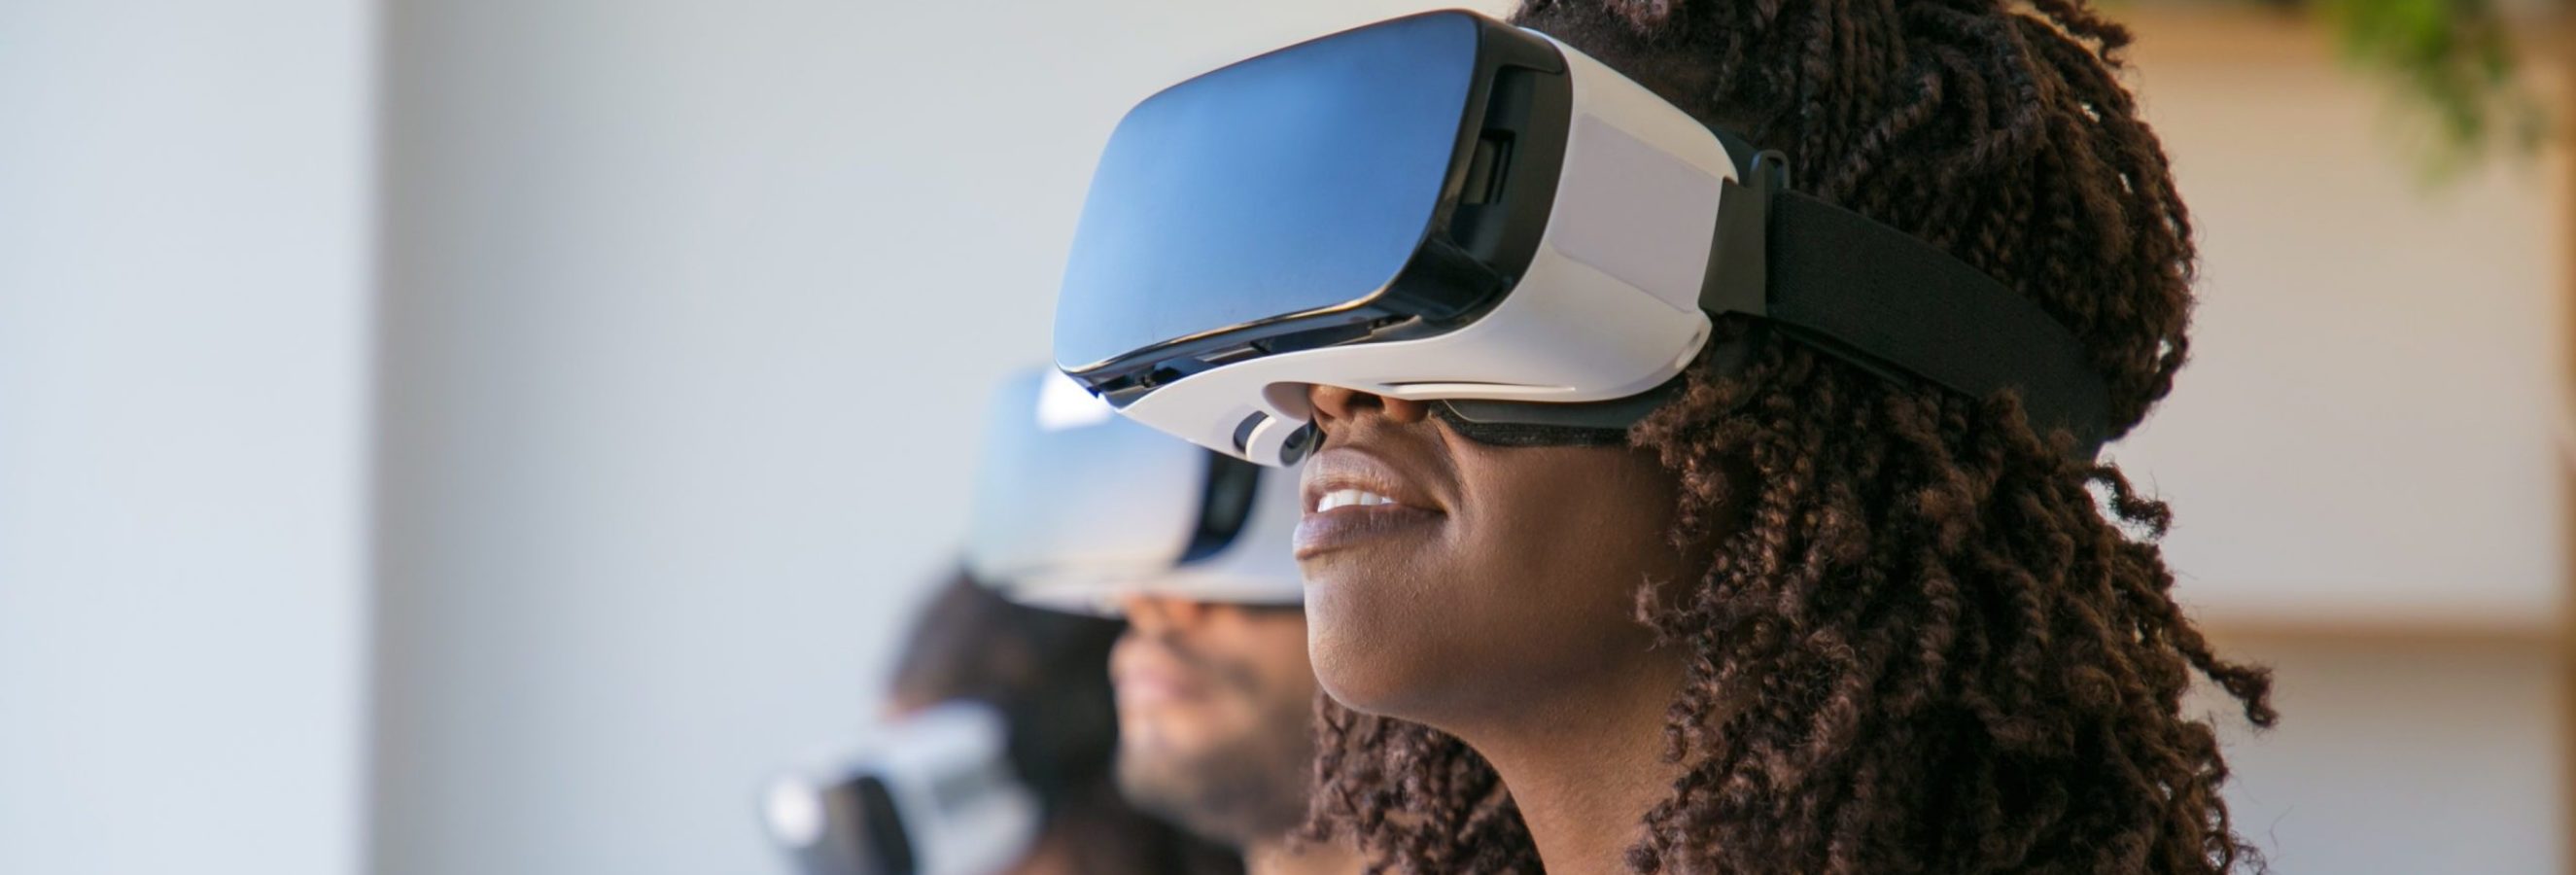 Virtual Reality as an Agile Research Testing Solution